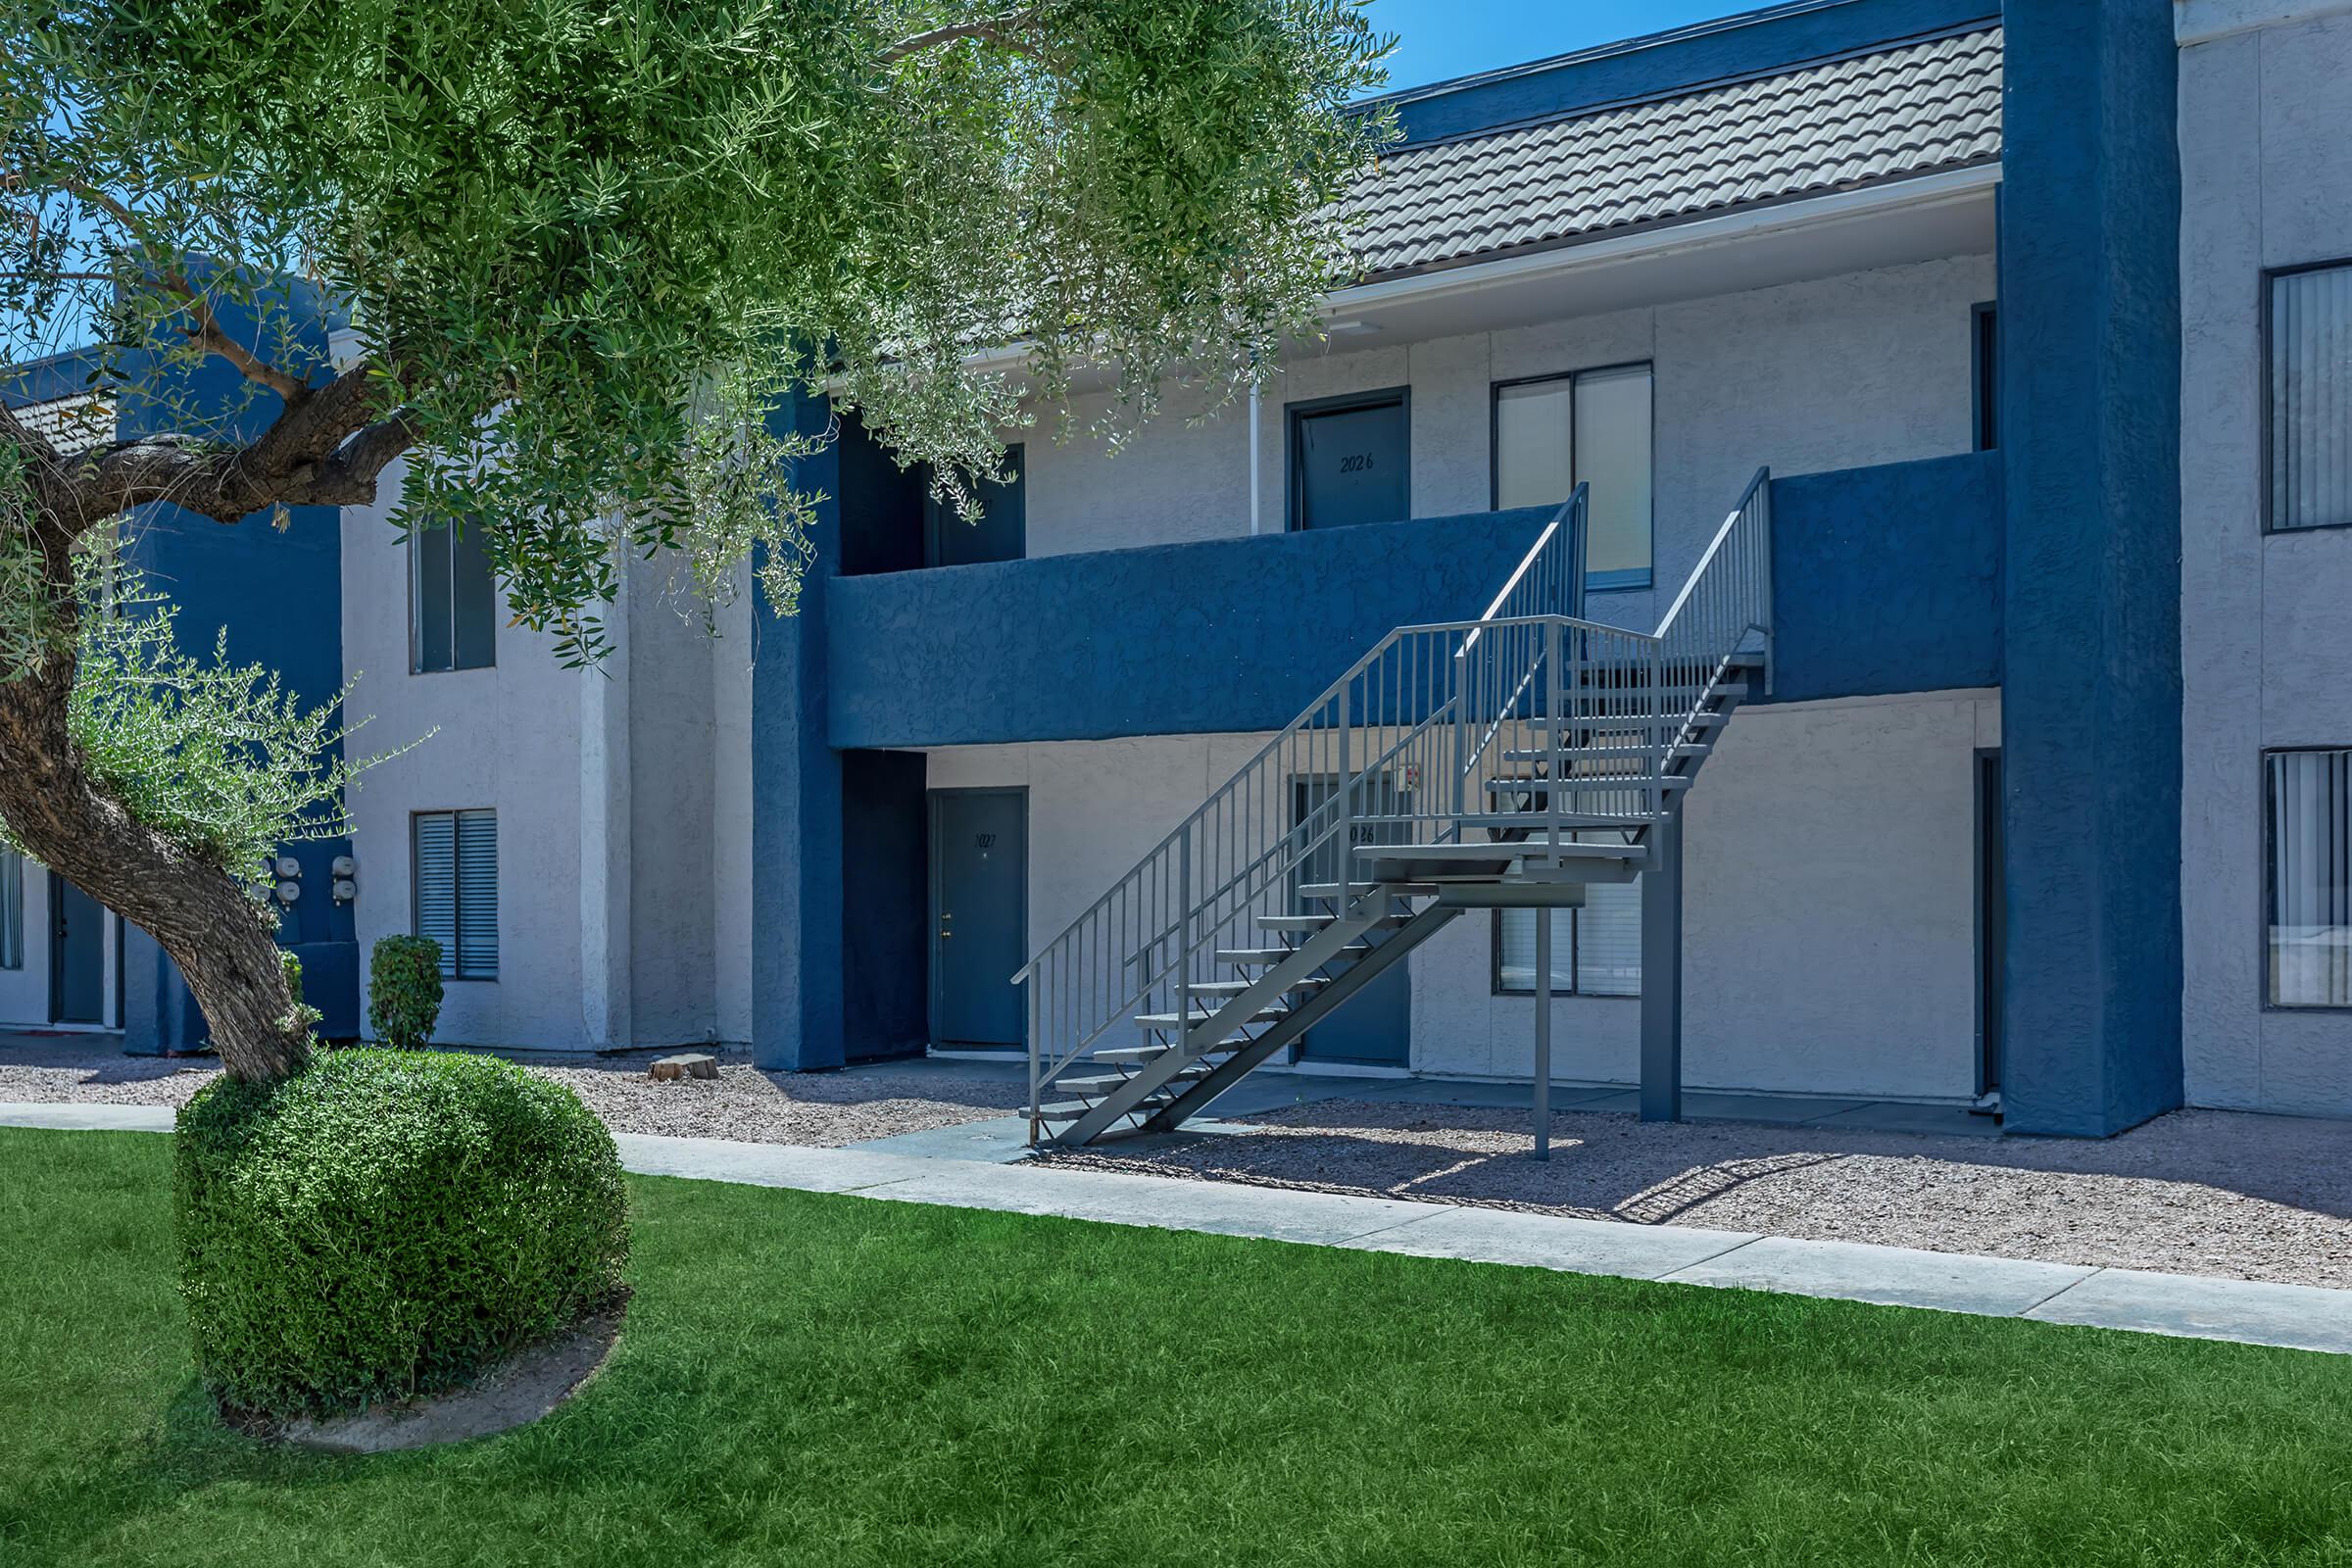 Blue and grey exterior Rise Camelback apartment building behind grass and sidewalk walkway